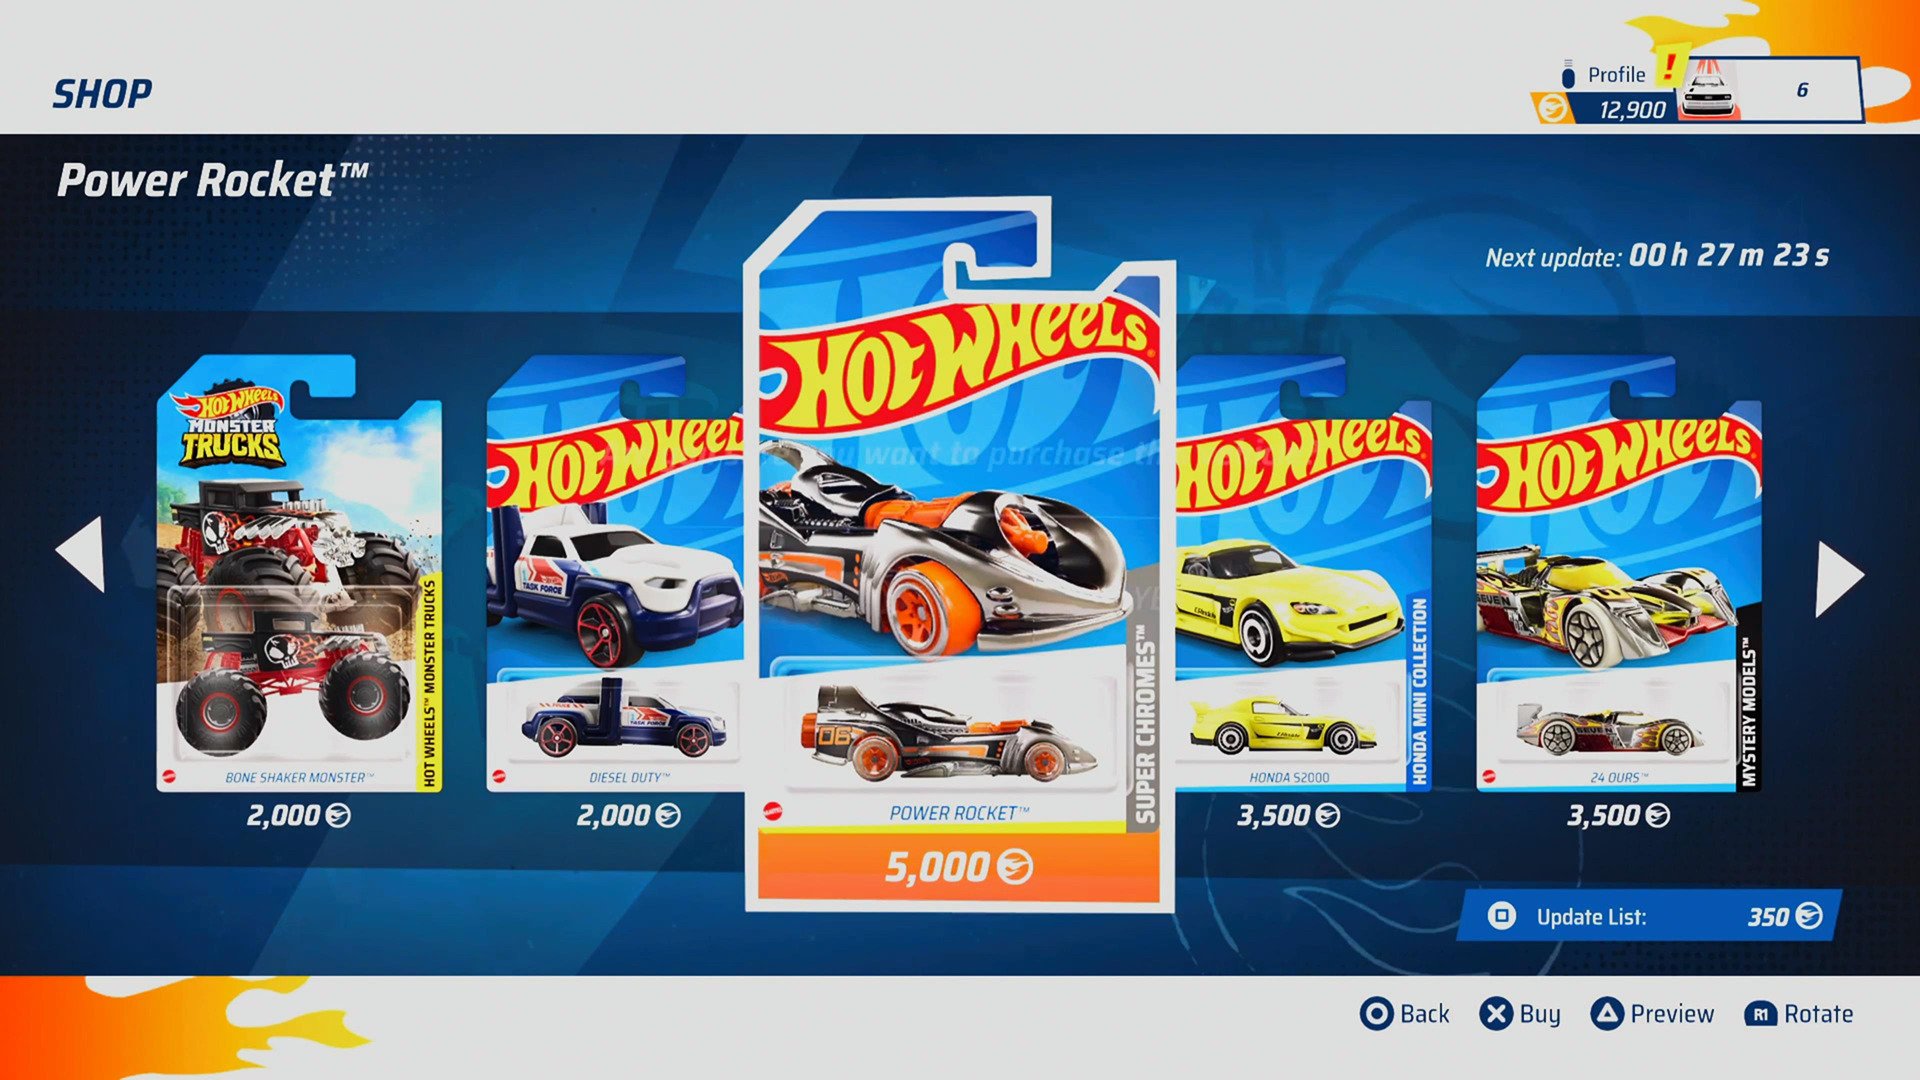 Hot Wheels Unleashed 2 Turbocharged Review: Small Scale, Big Fun – GTPlanet